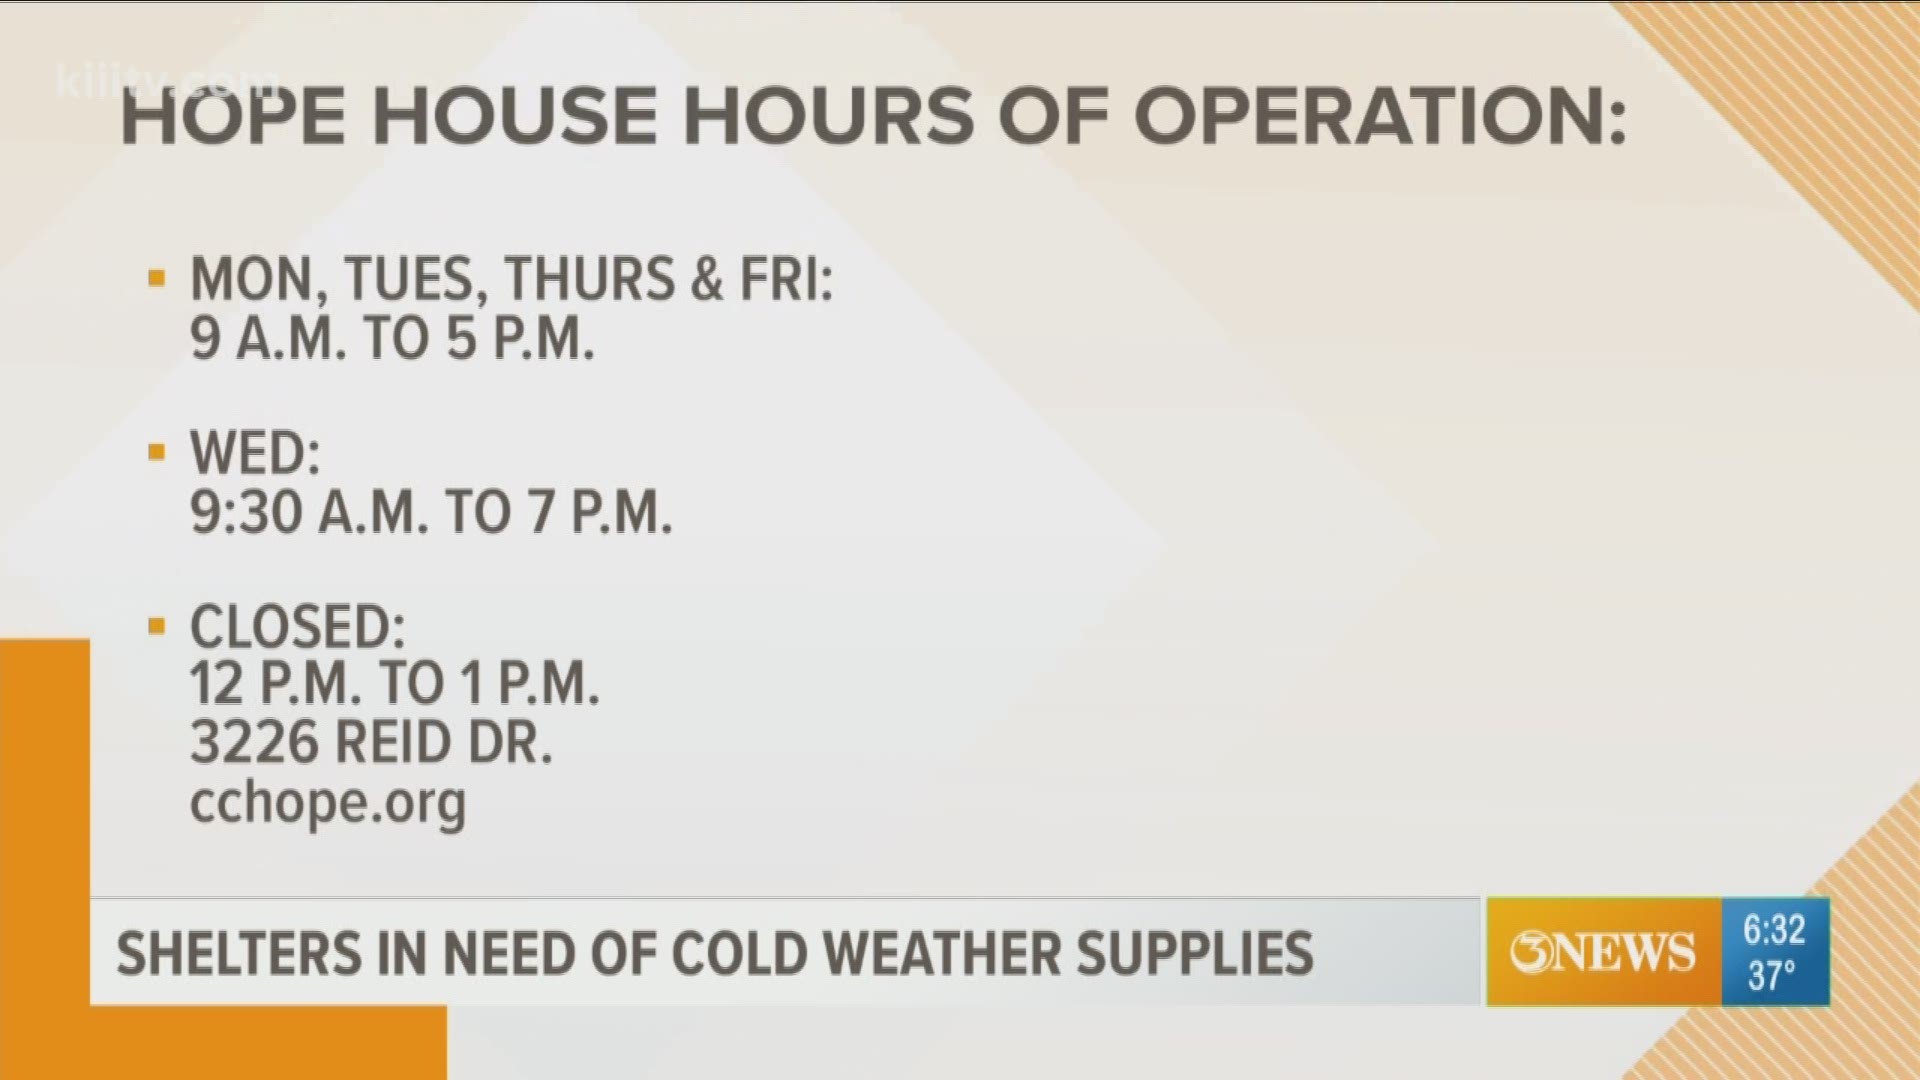 The Hope House is mostly busy from Fall through Winter with a demand for warm clothes.